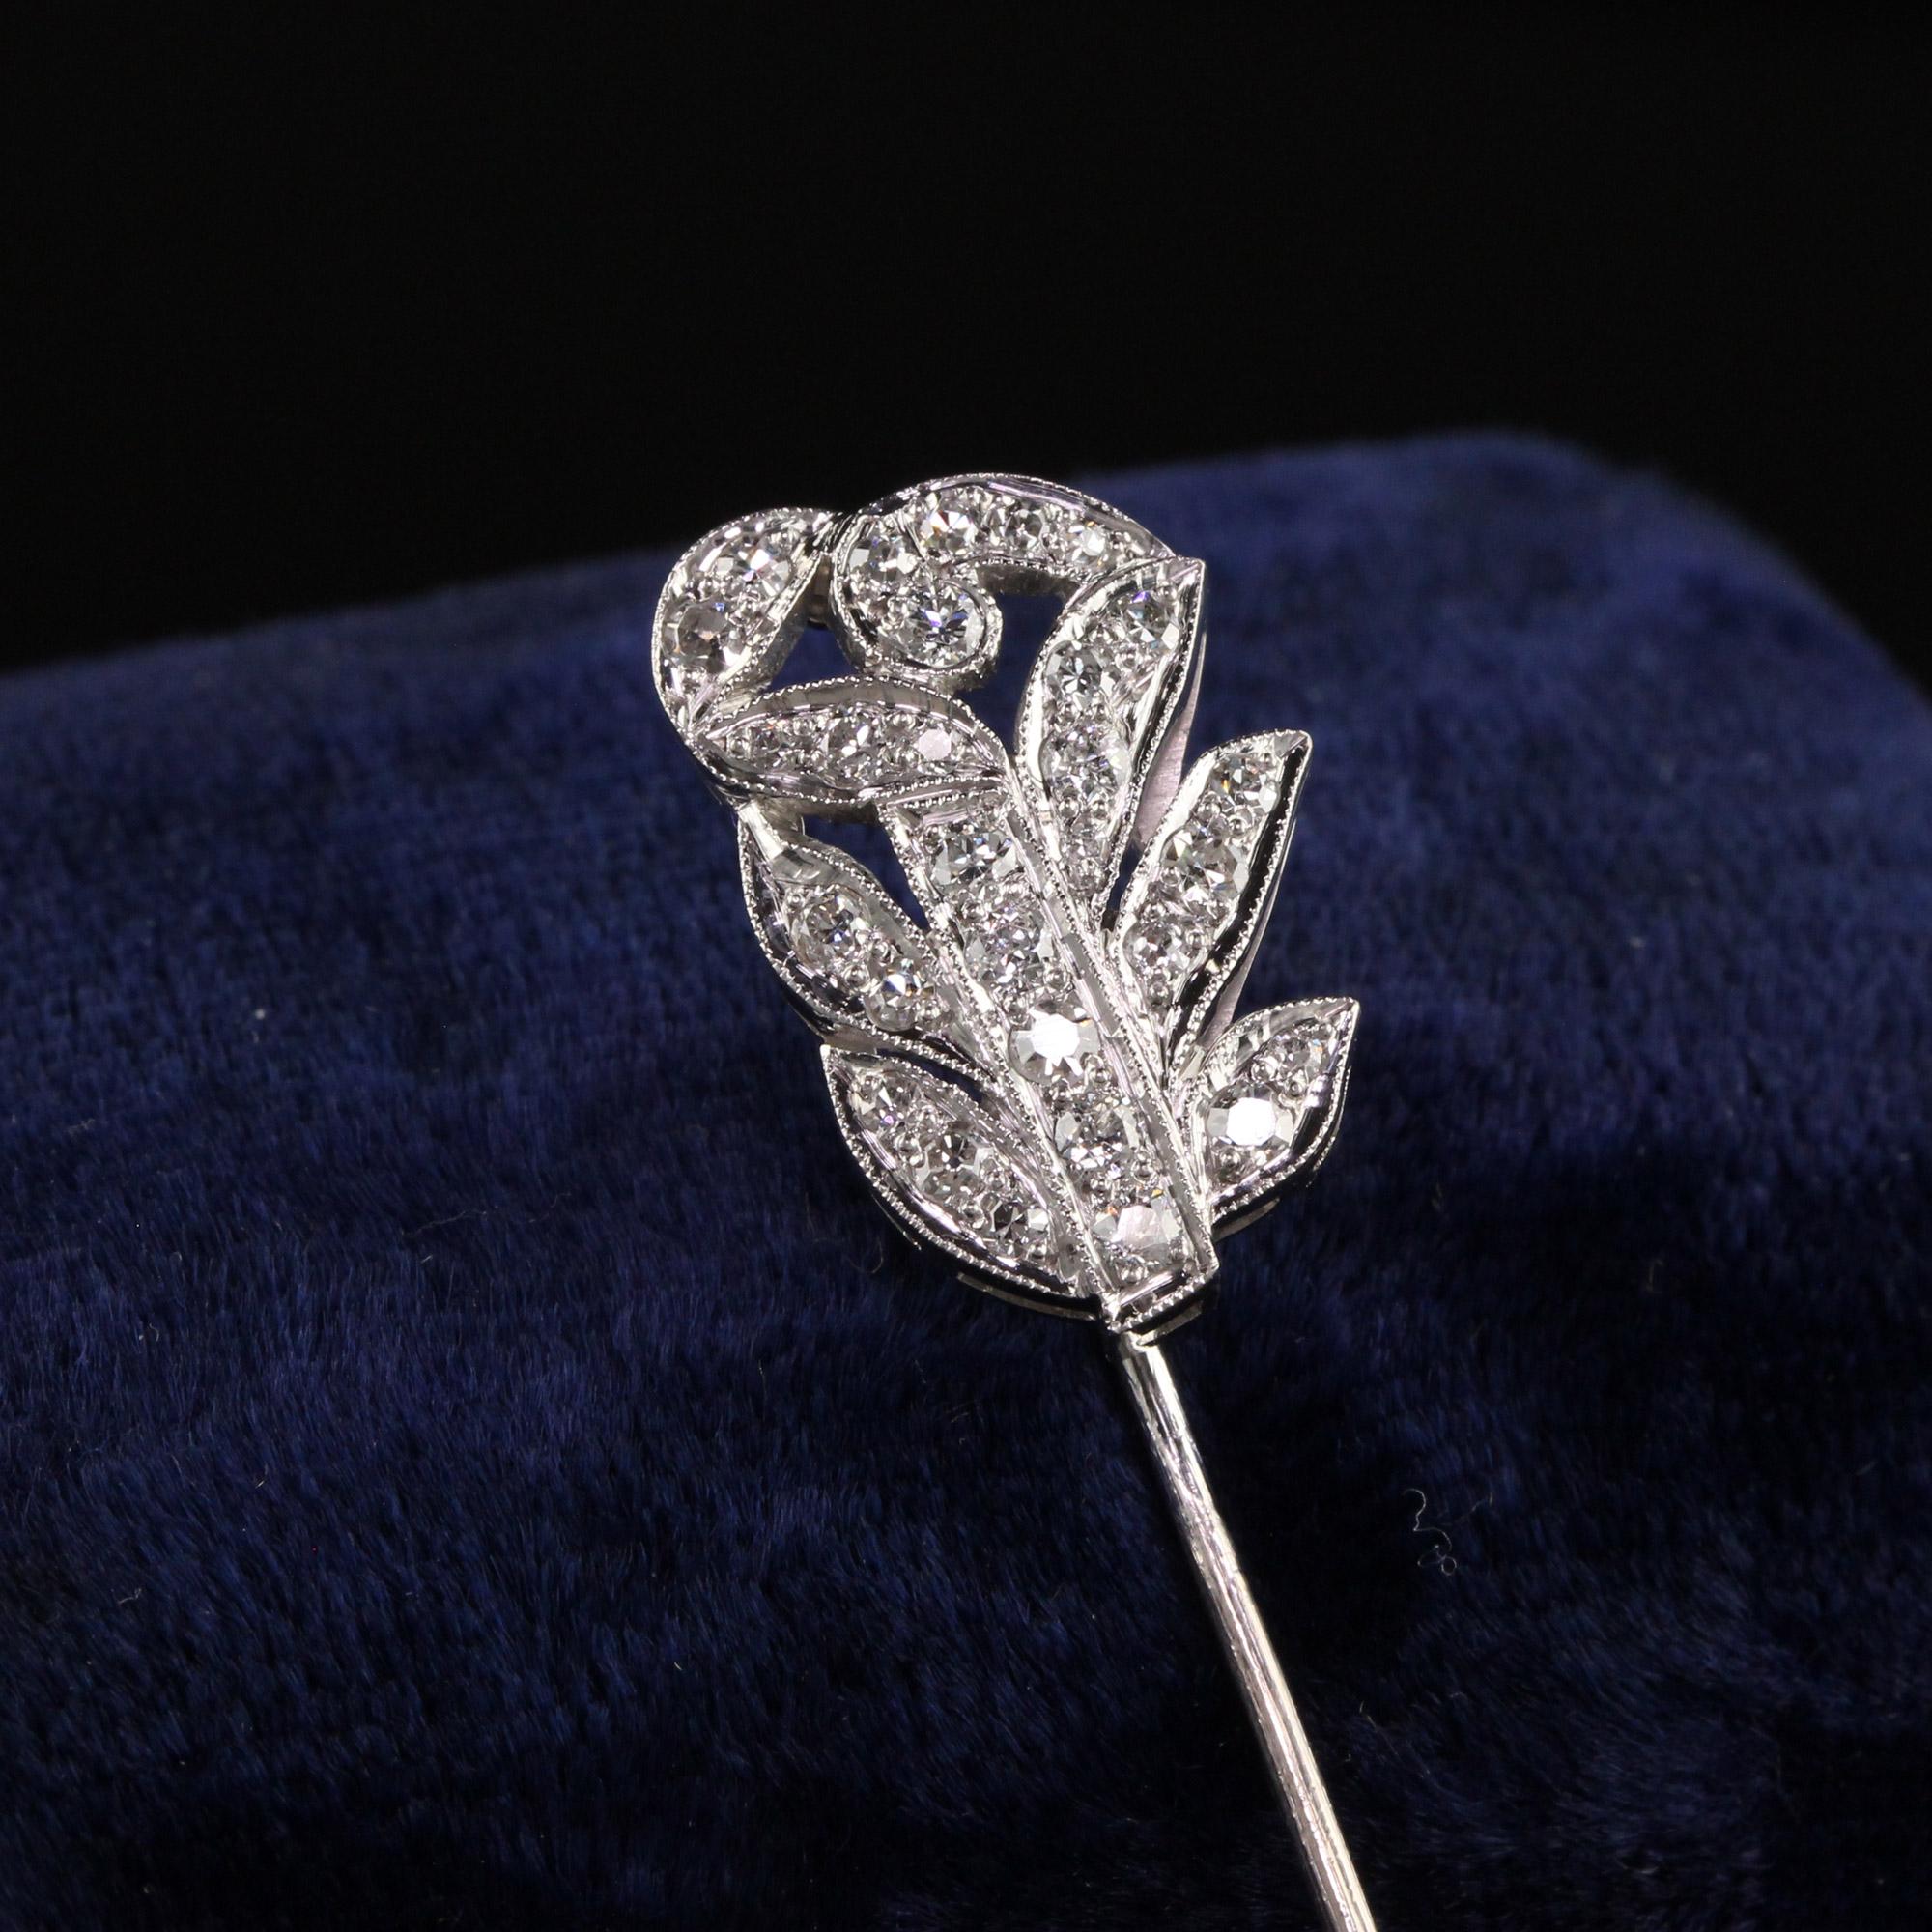 Beautiful Antique Art Deco Platinum and 18K White Gold Old Euro Diamond Floral Stick Pin. This gorgeous stick pin is crafted in platinum and 18k white gold. The floral section of the pin is platinum and the pin section is 18k white gold. There are